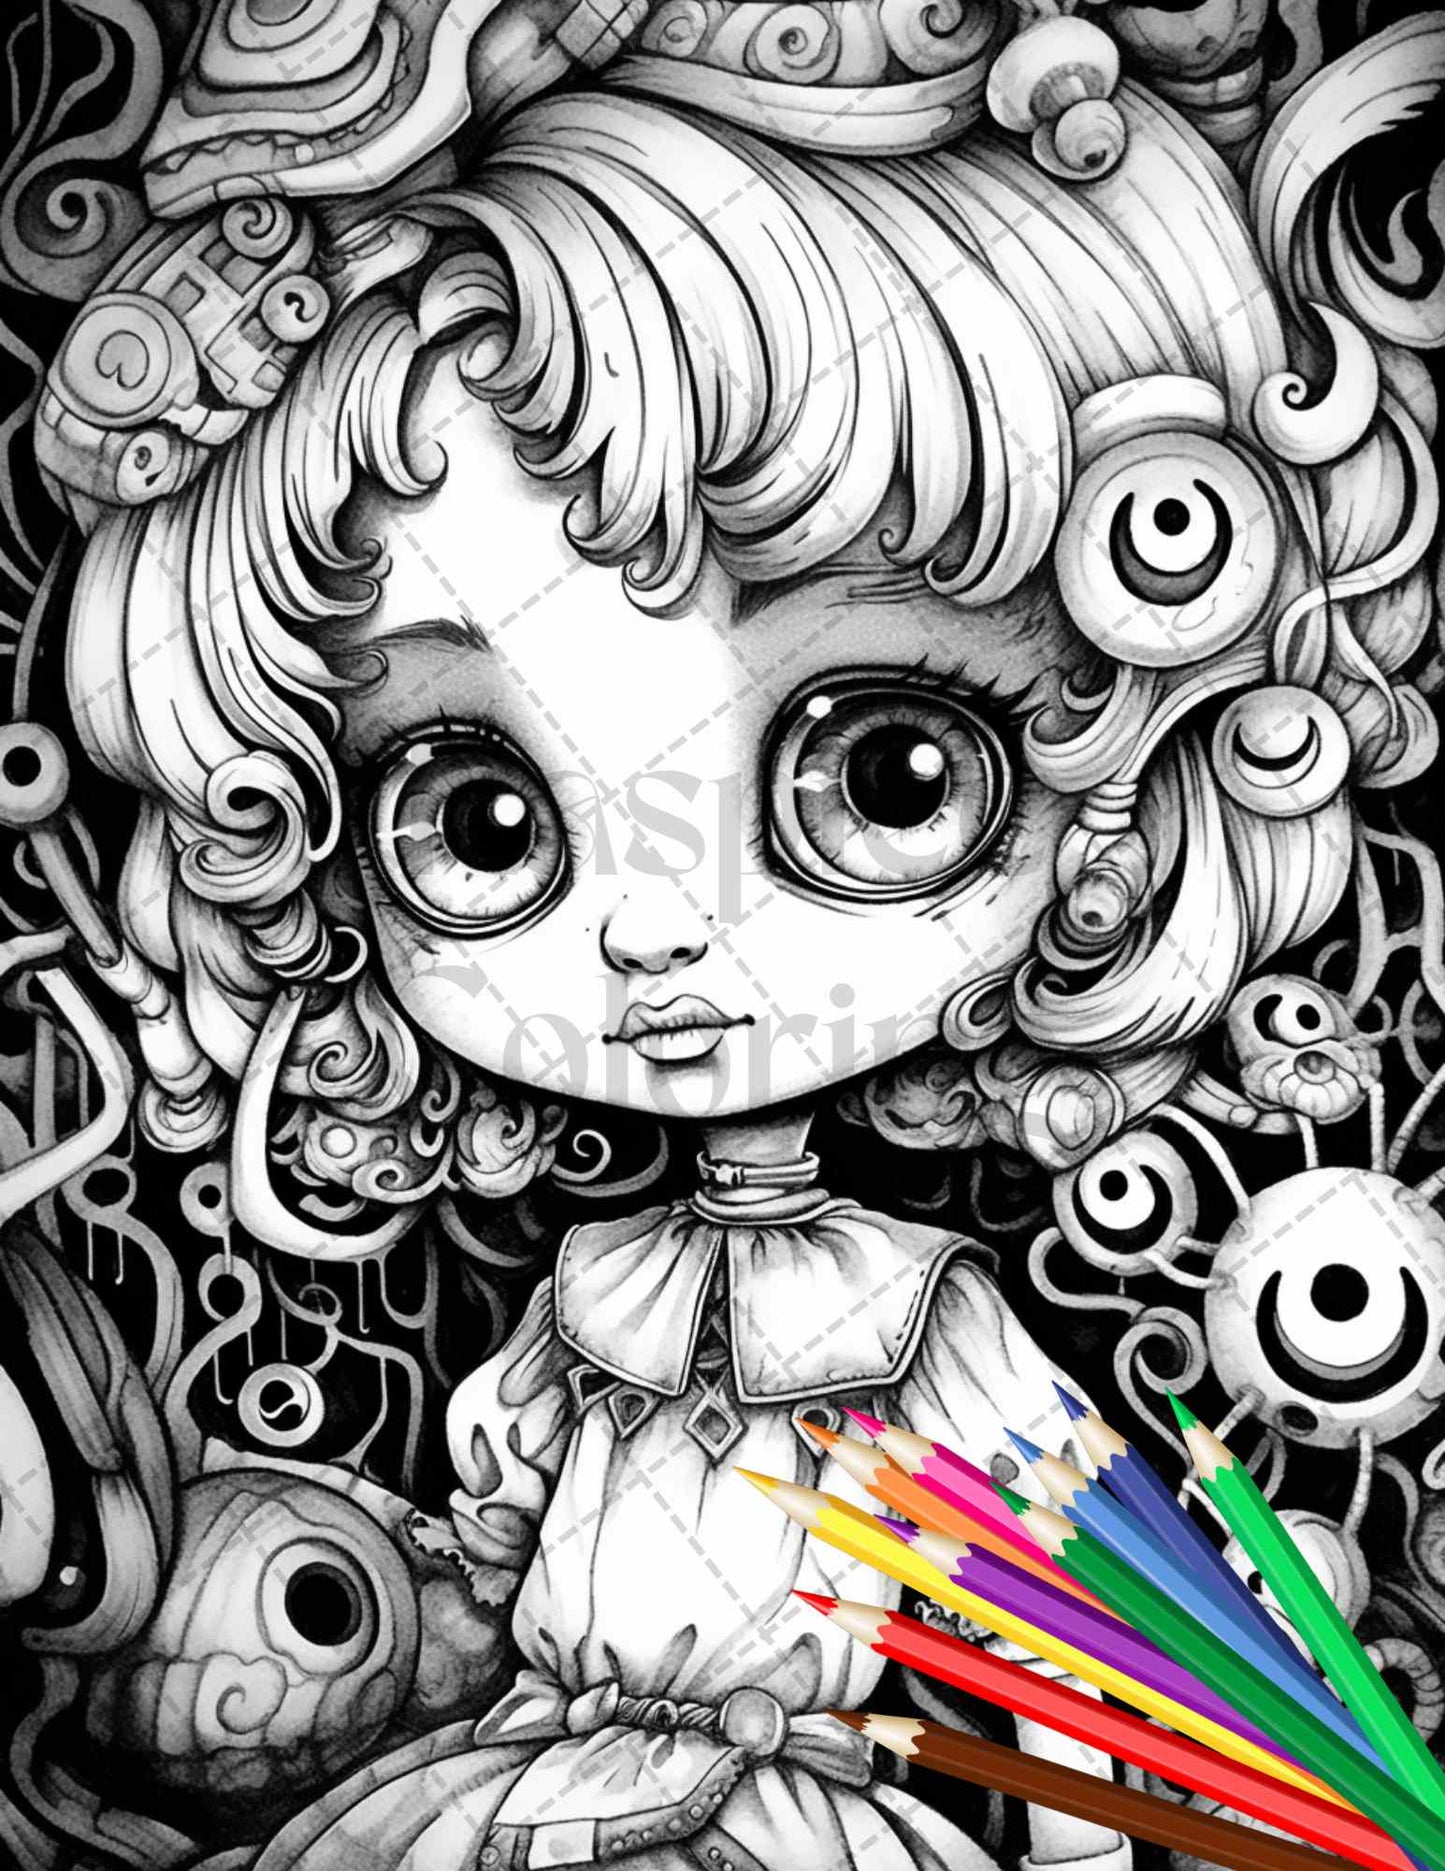 Ghoulish Girls Grayscale Coloring Pages, Adult Halloween Coloring Printable, Spooky Gothic Coloring Book, Witchcraft and Ghostly Art Prints, Dark Fantasy Coloring Sheets